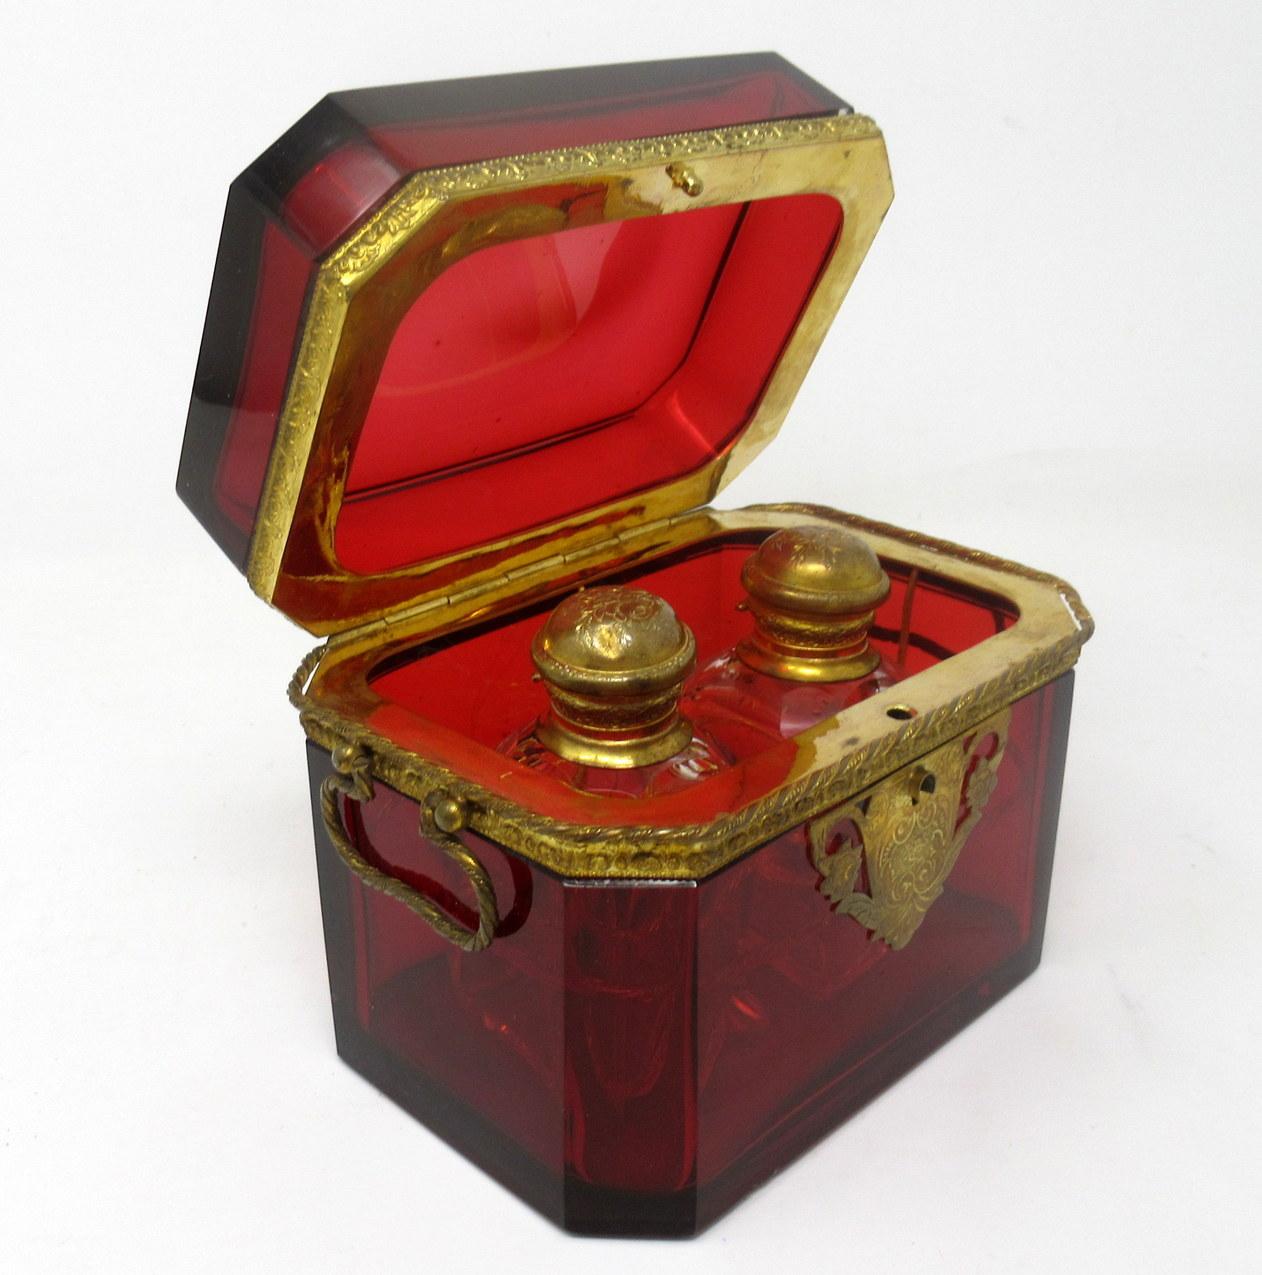 An exceptionally fine quality & quite rare bohemian ruby red crystal glass scent bottle casket made during the last half of the nineteenth century.

The rectangular form heavy gauge hinged lid casket with lavish ormolu mounts and twin carry